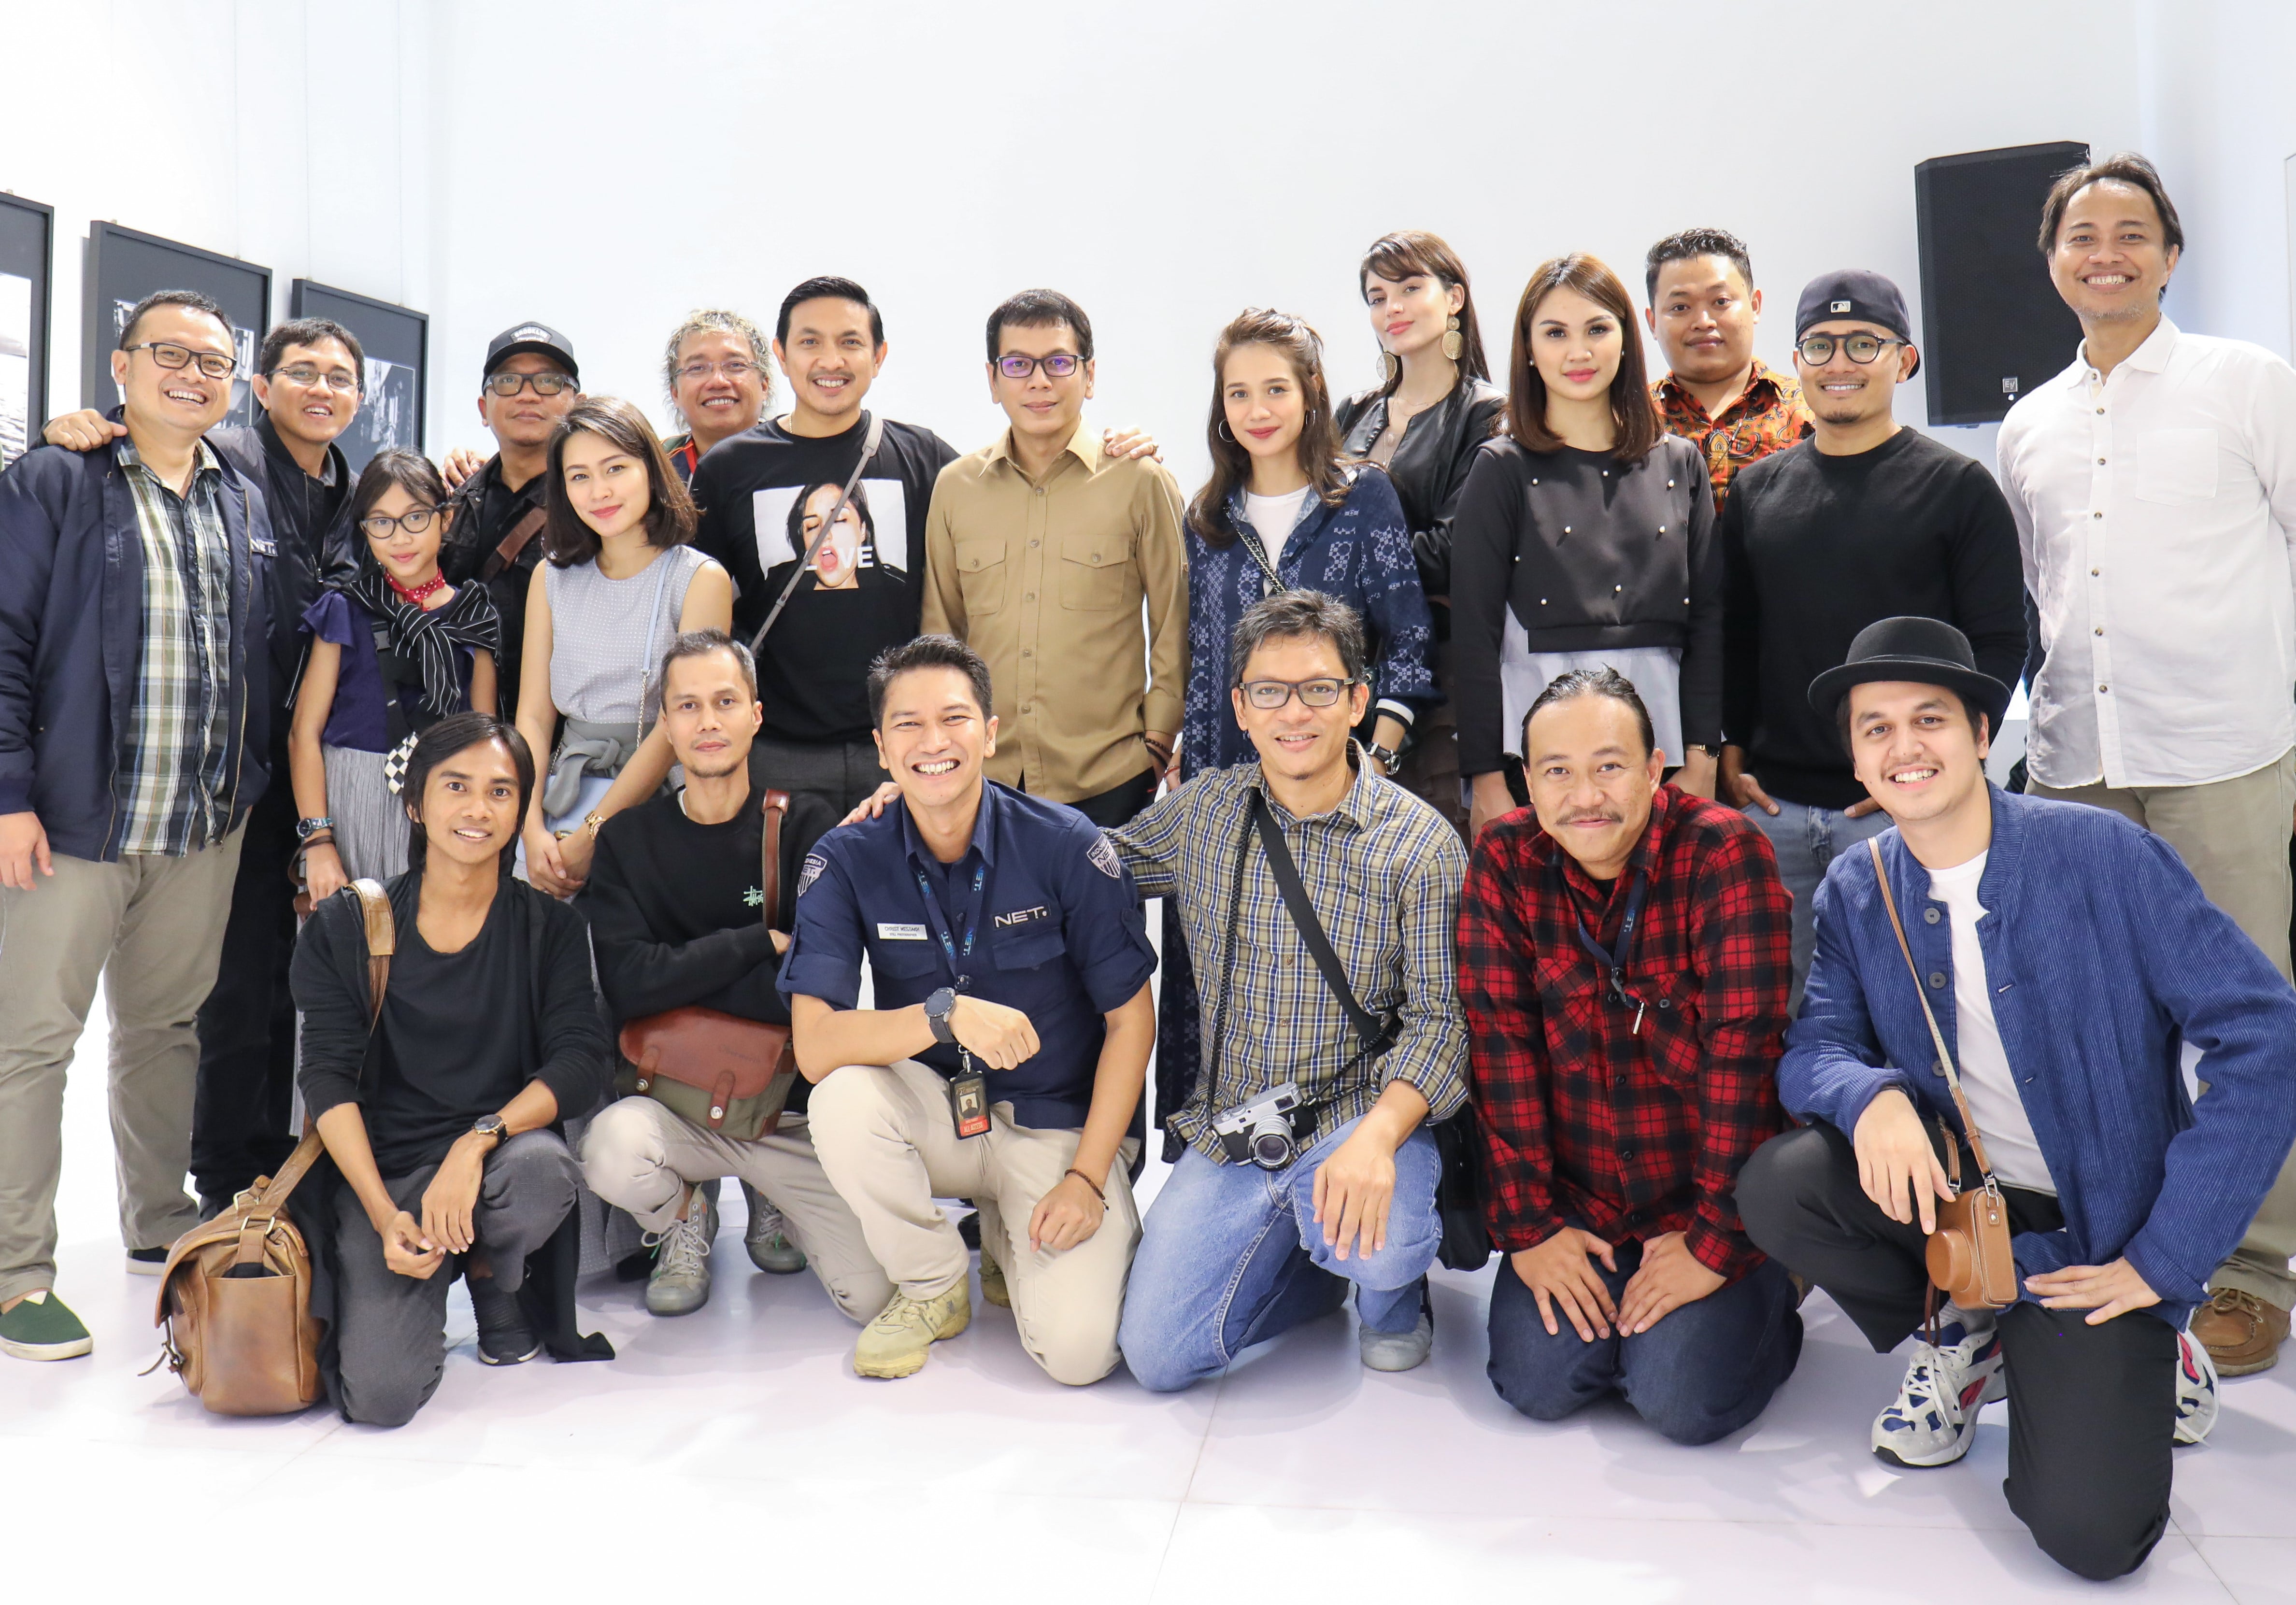 The participants of the "SHADOW" photography exhibition who are from the NET Photography community posed together at the Eurokars Gallery, Plaza Indonesia, Jakarta